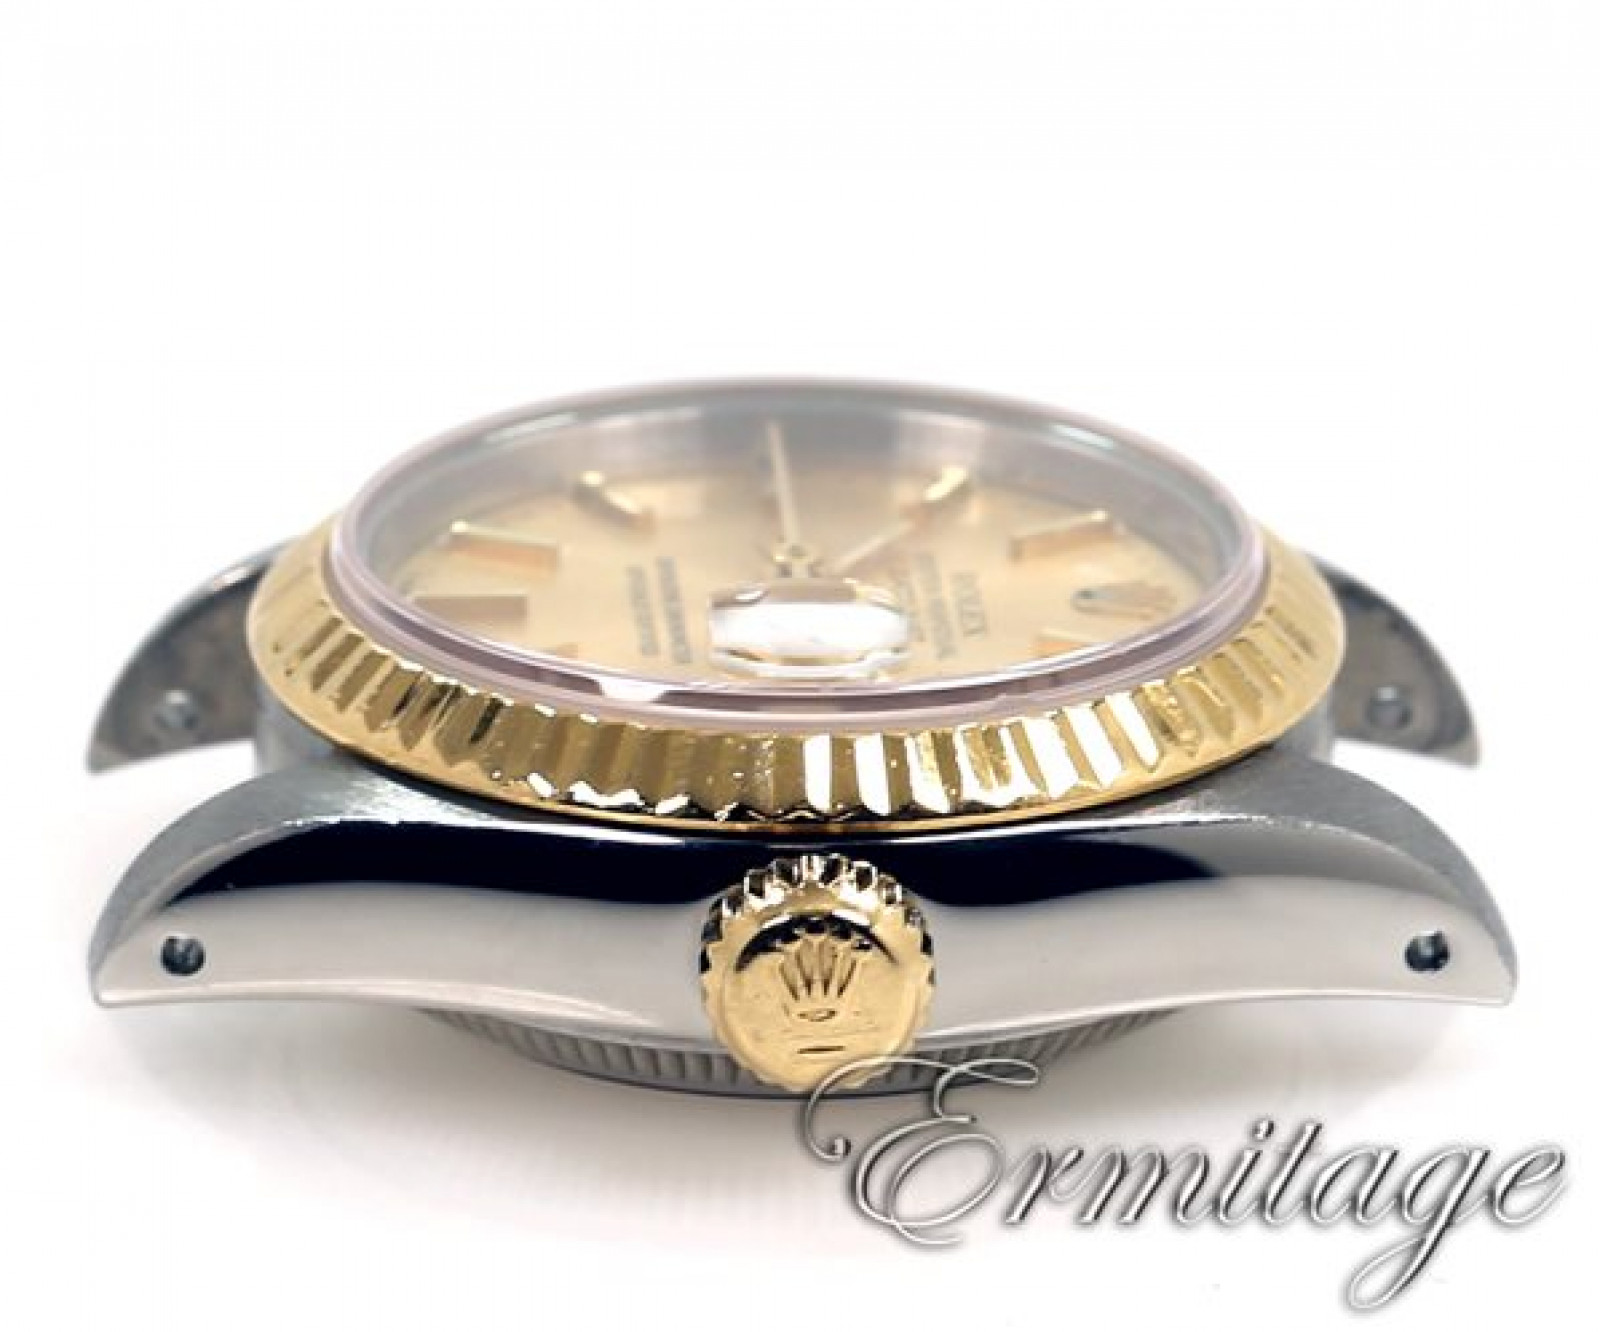 Pre-Owned Gold & Steel Rolex Datejust 69173 Year 1985